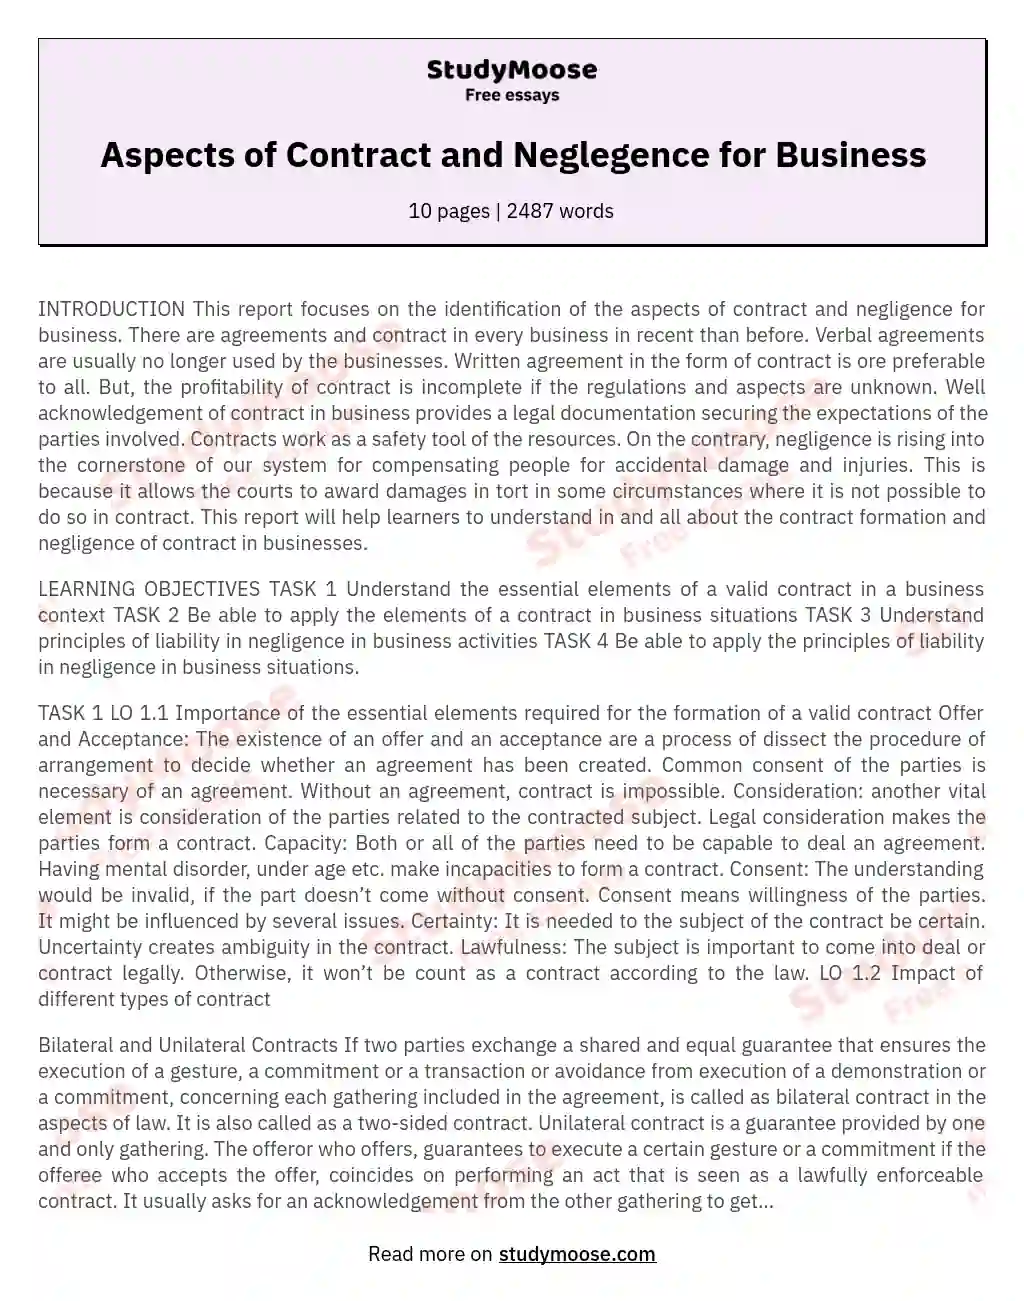 Aspects of Contract and Neglegence for Business essay